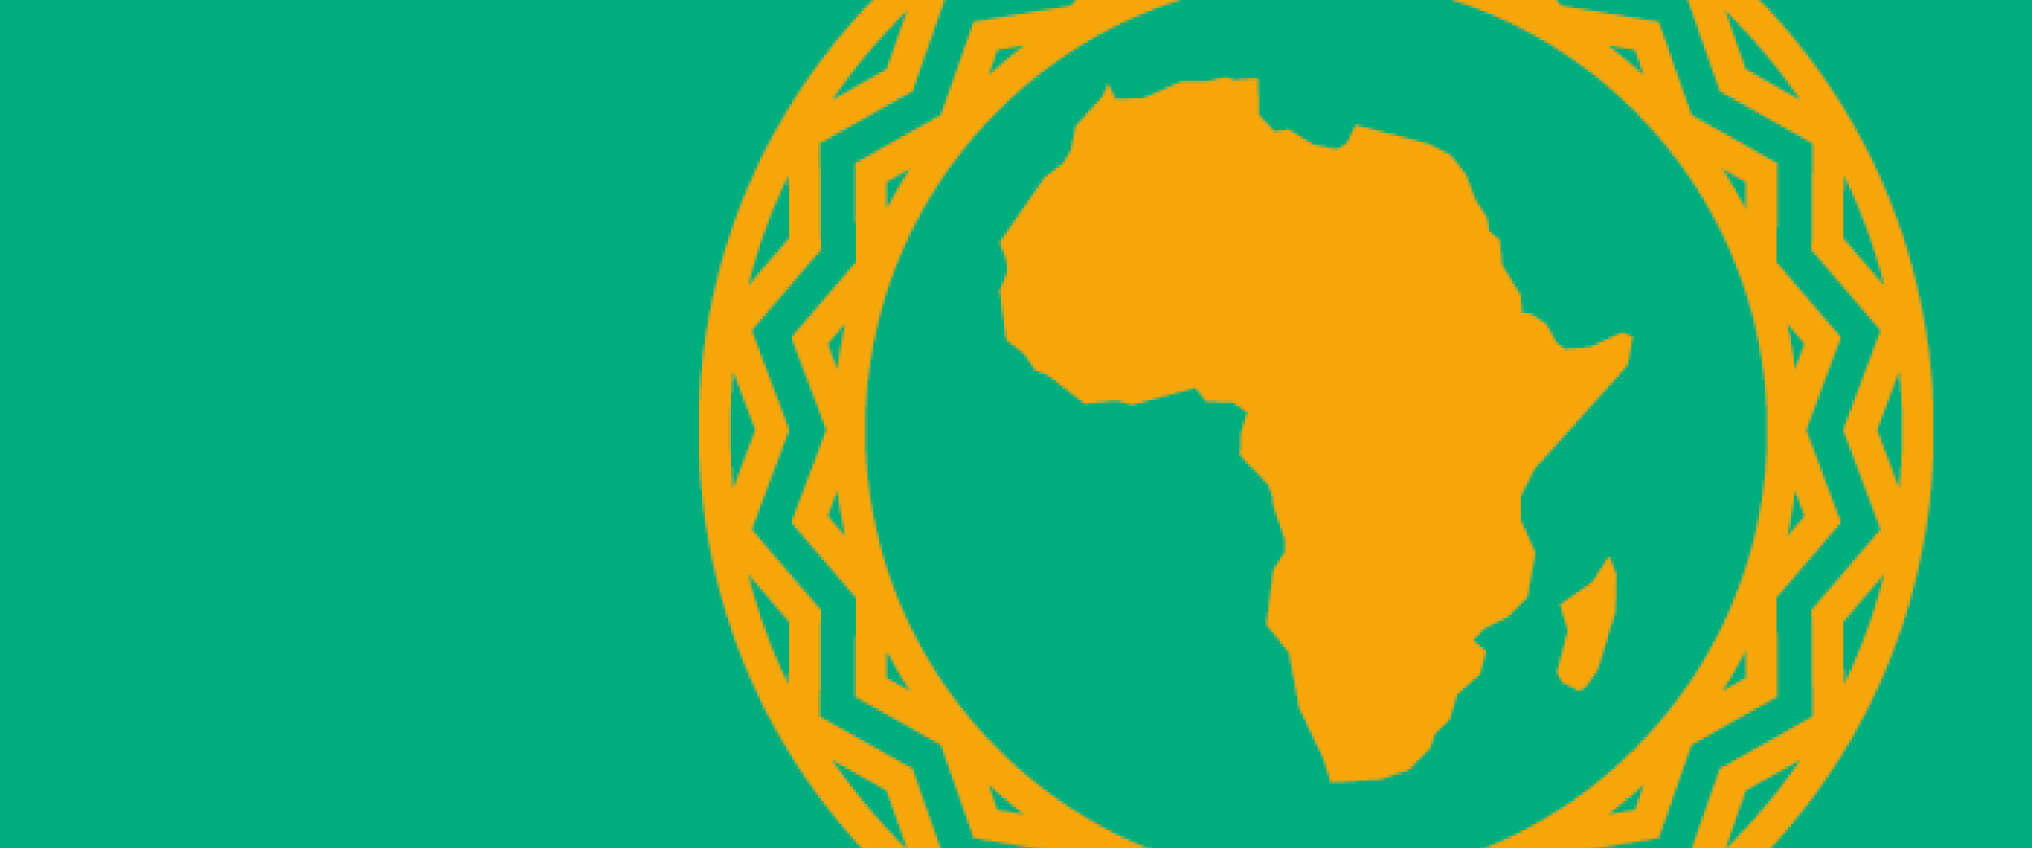 Image of africa on green background